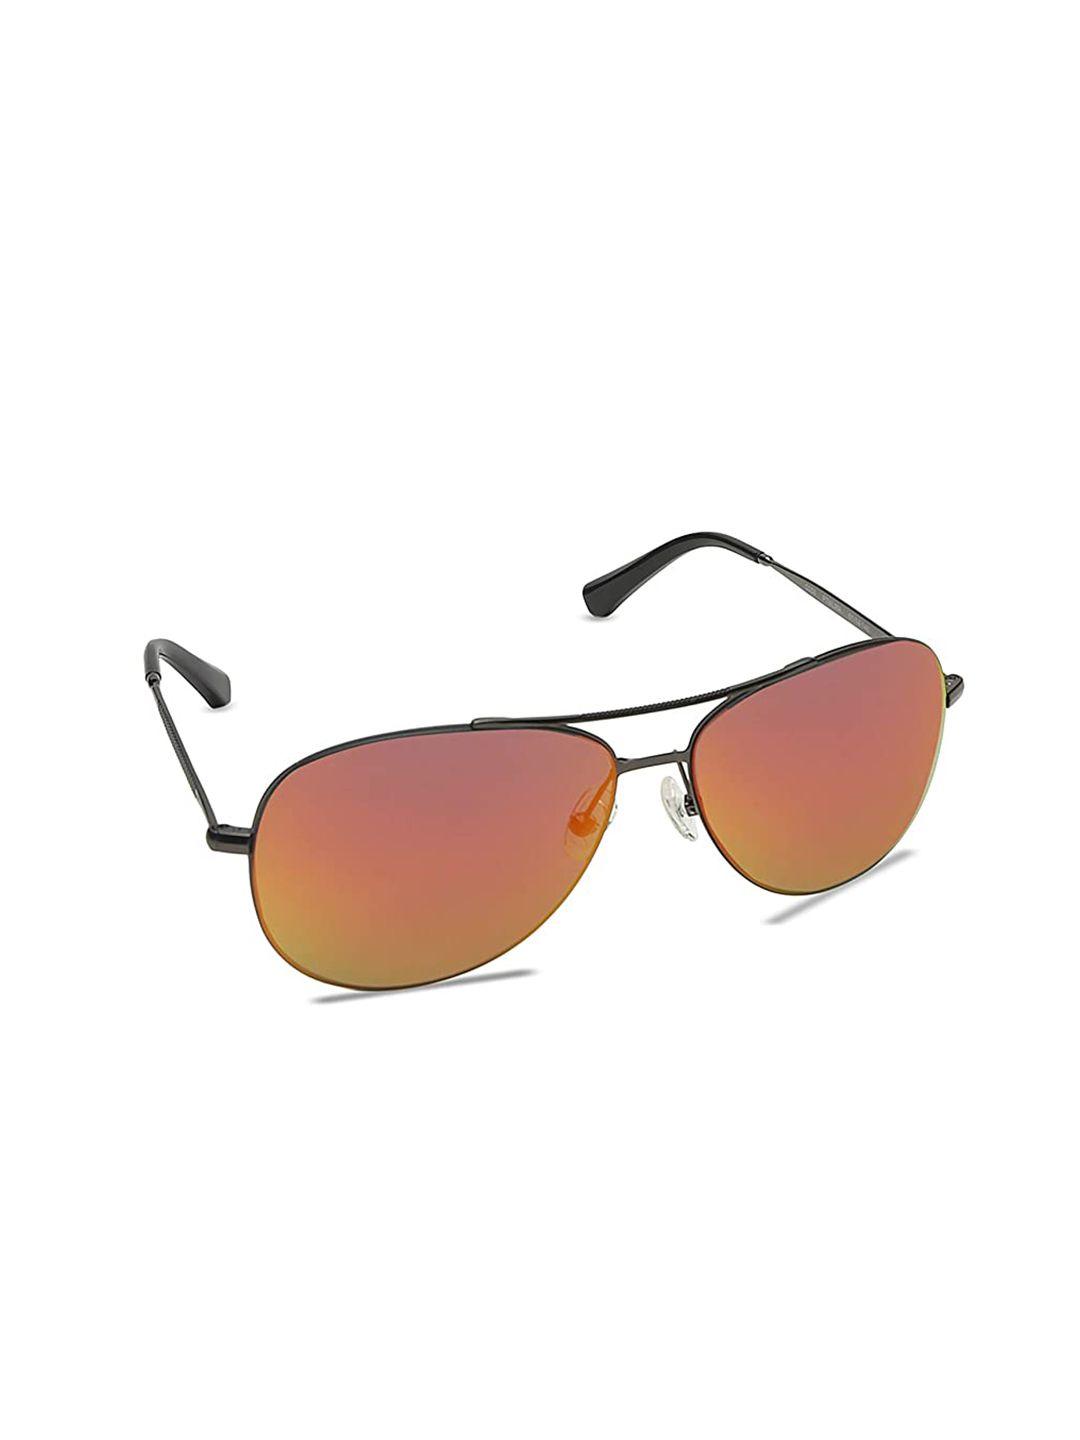 titan unisex red lens  aviator sunglasses with uv protected lens-g258ptmlma